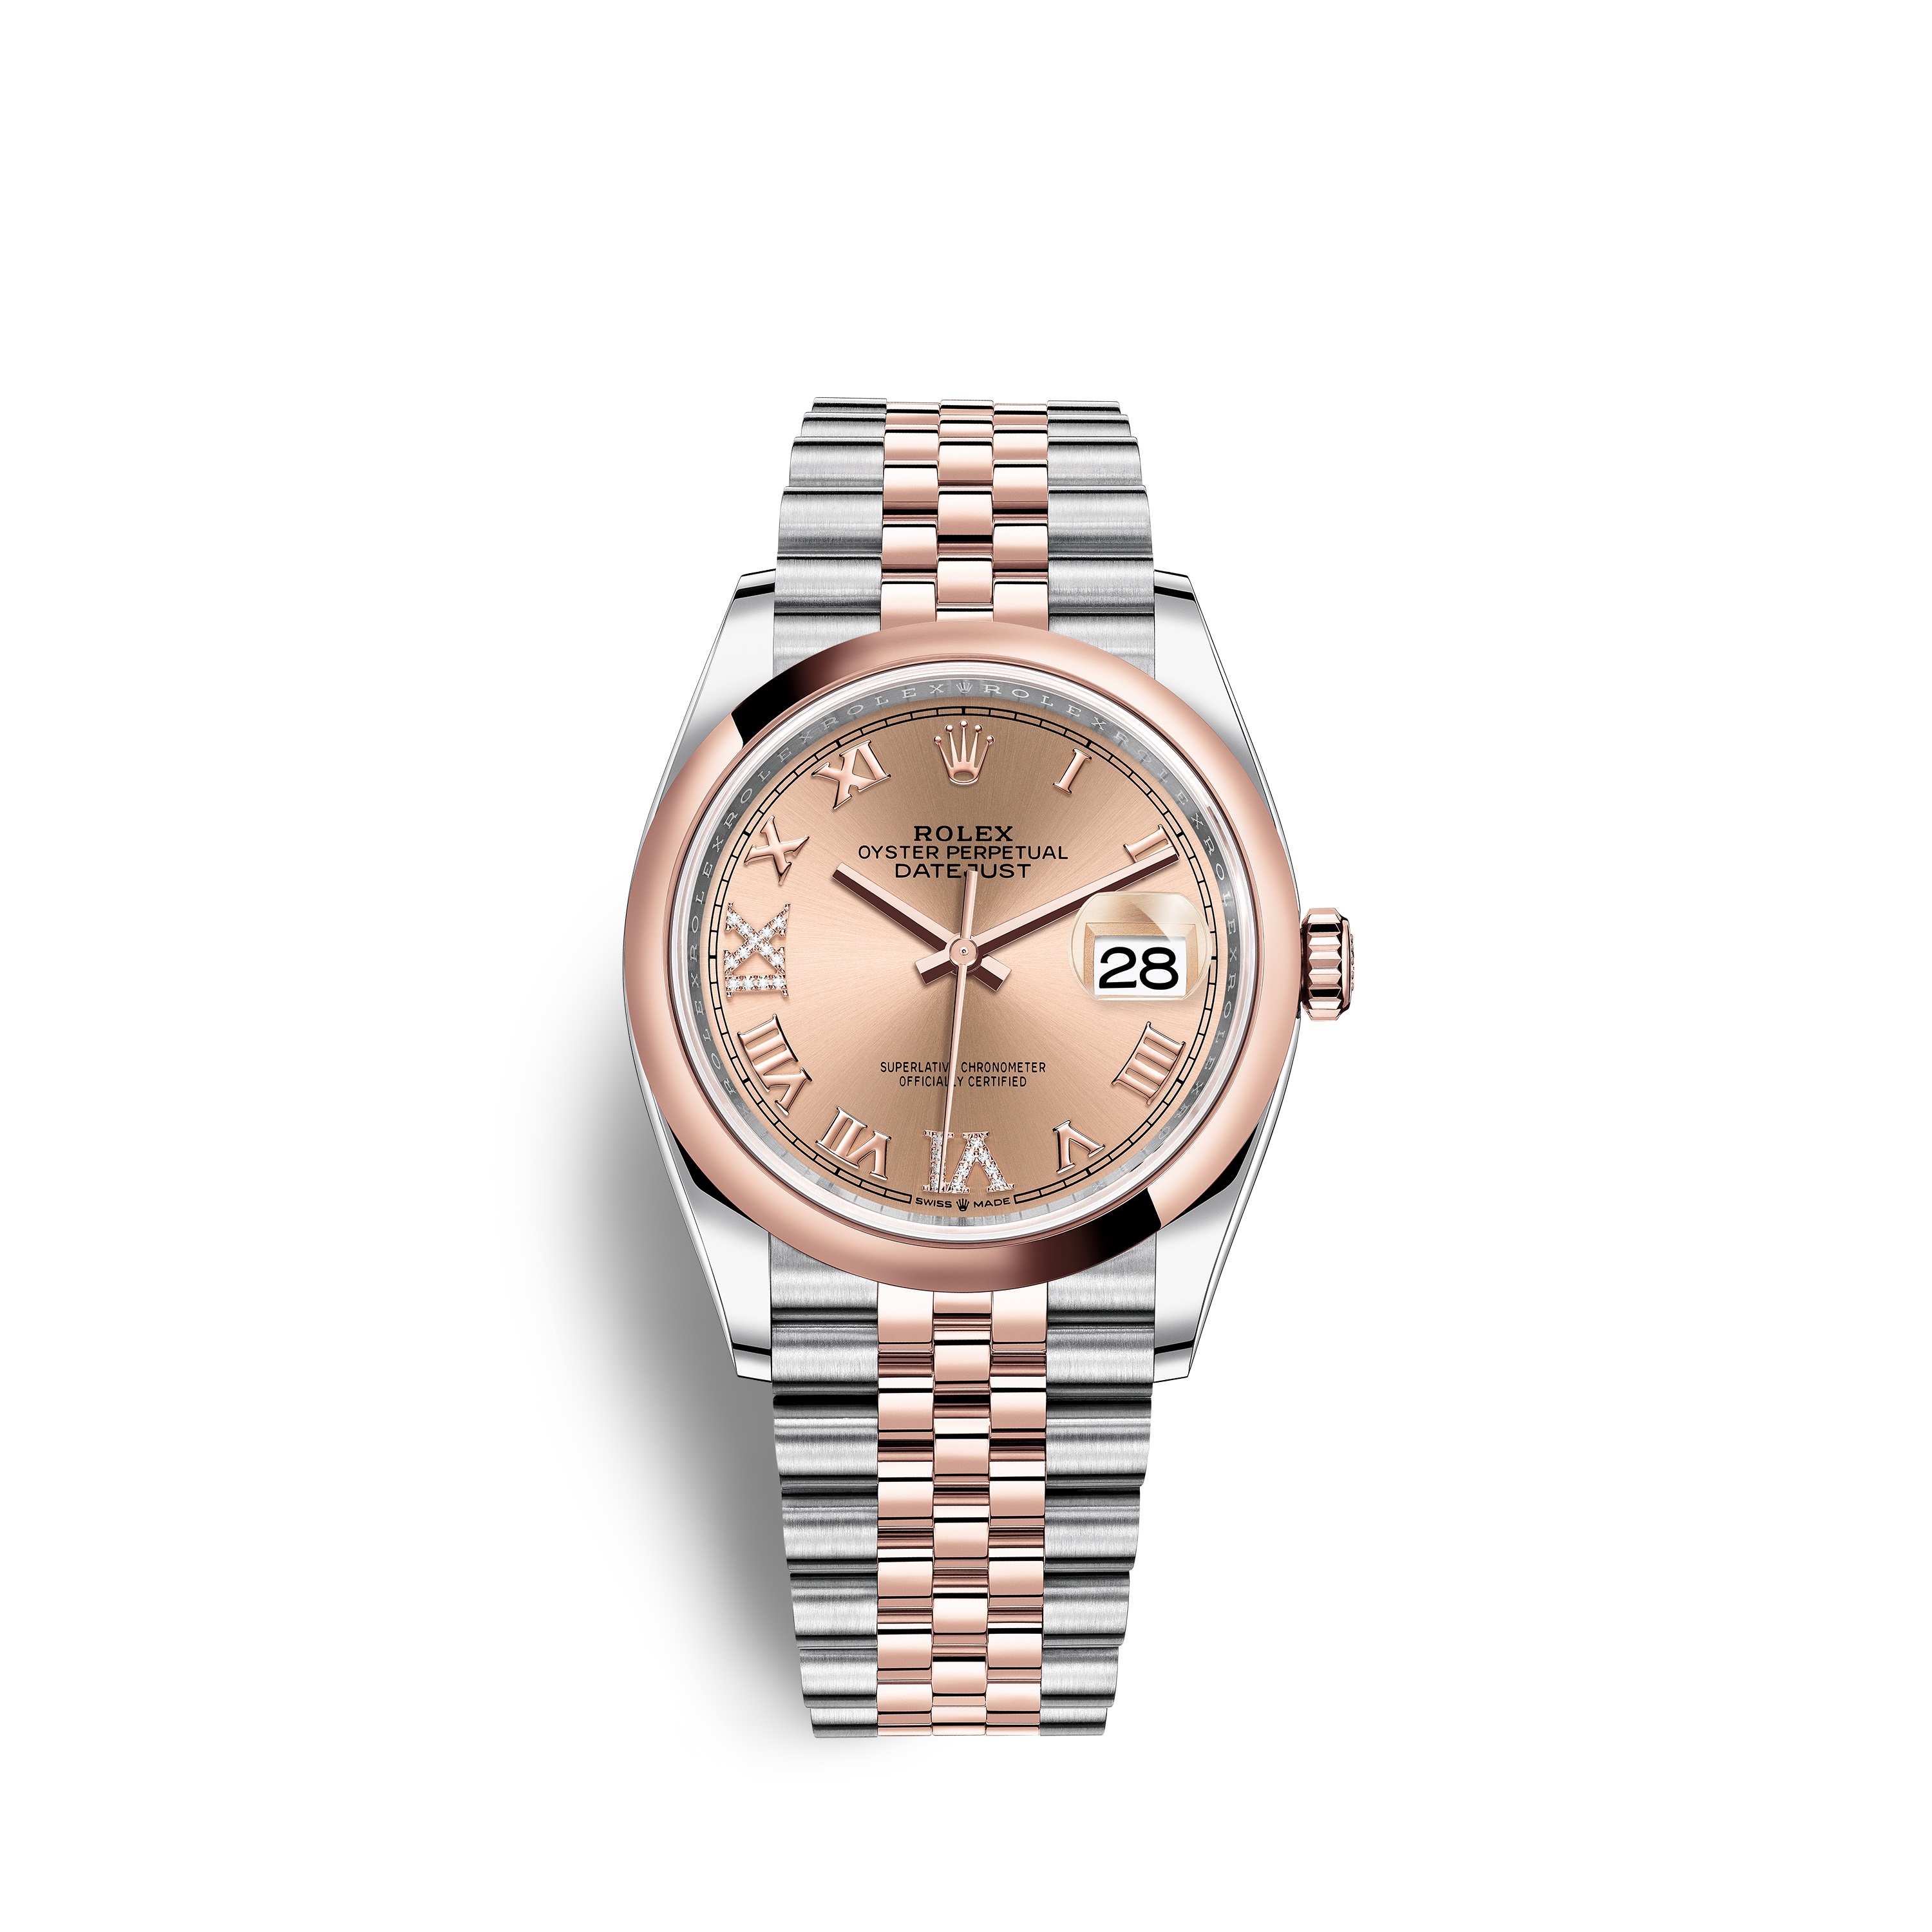 Datejust 36 126201 Rose Gold & Stainless Steel Watch (Rose Set with Diamonds)